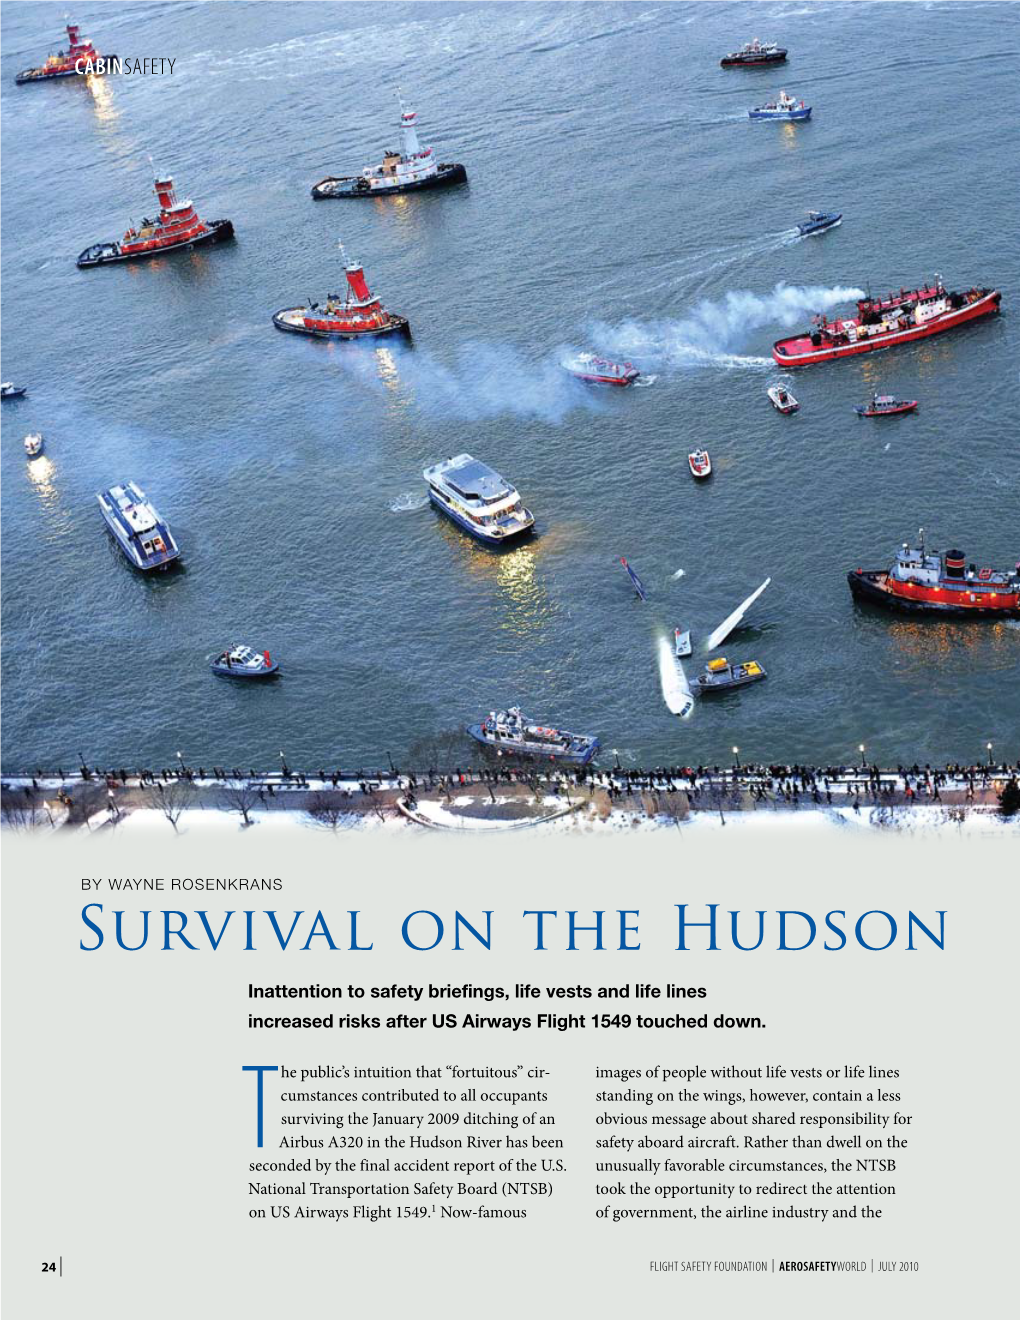 Survival on the Hudson Inattention to Safety Briefings, Life Vests and Life Lines Increased Risks After US Airways Flight 1549 Touched Down